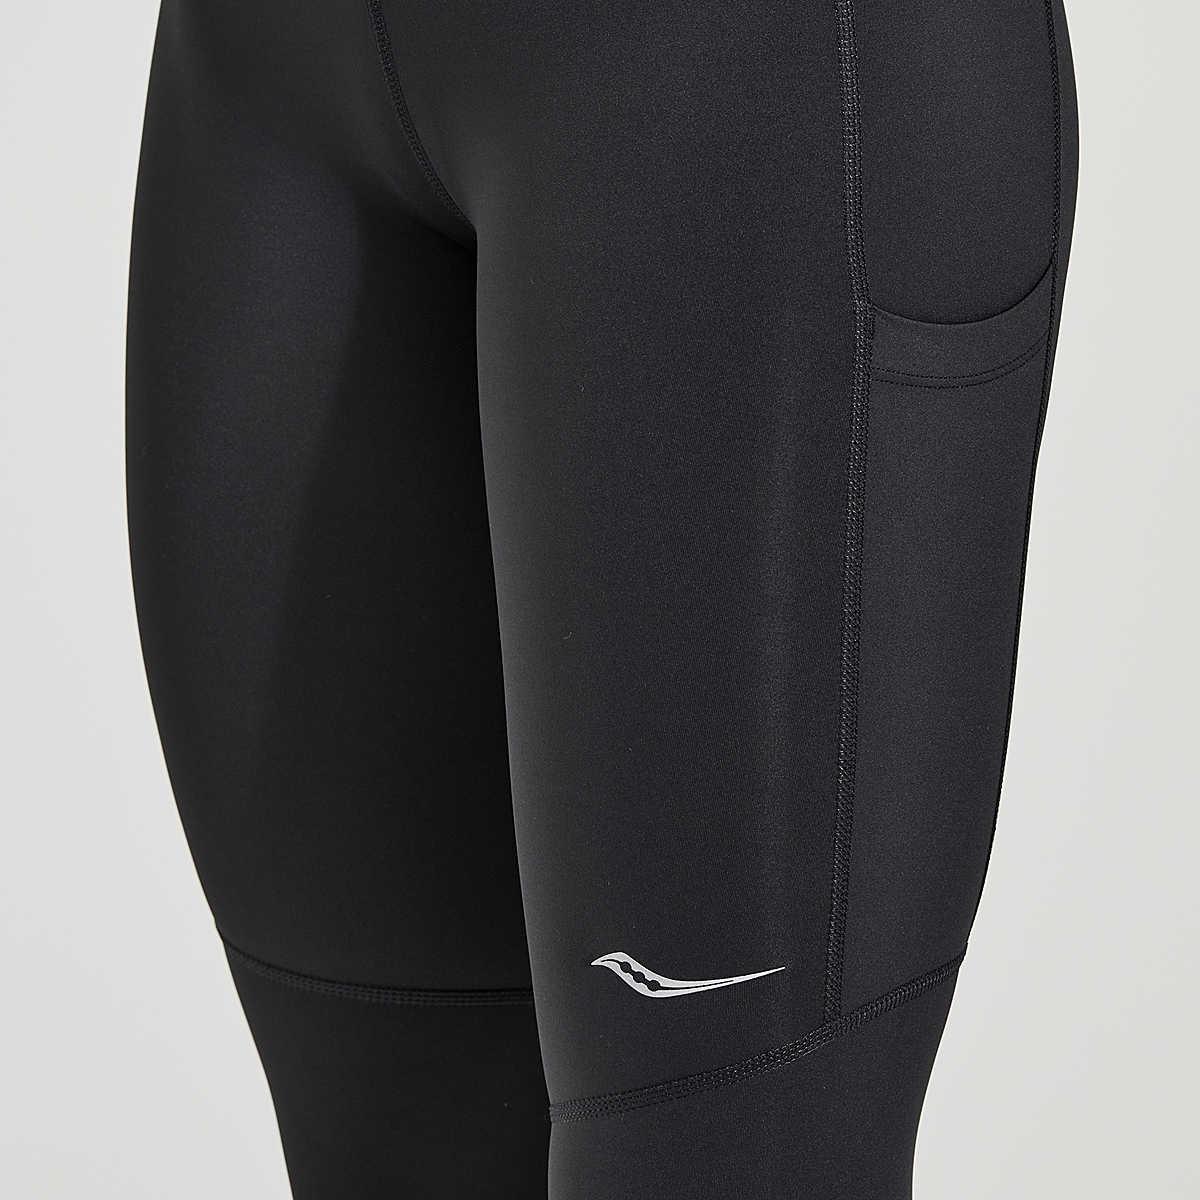 Saucony - Women's Fortify Crop Leggings - The Shoe Collective